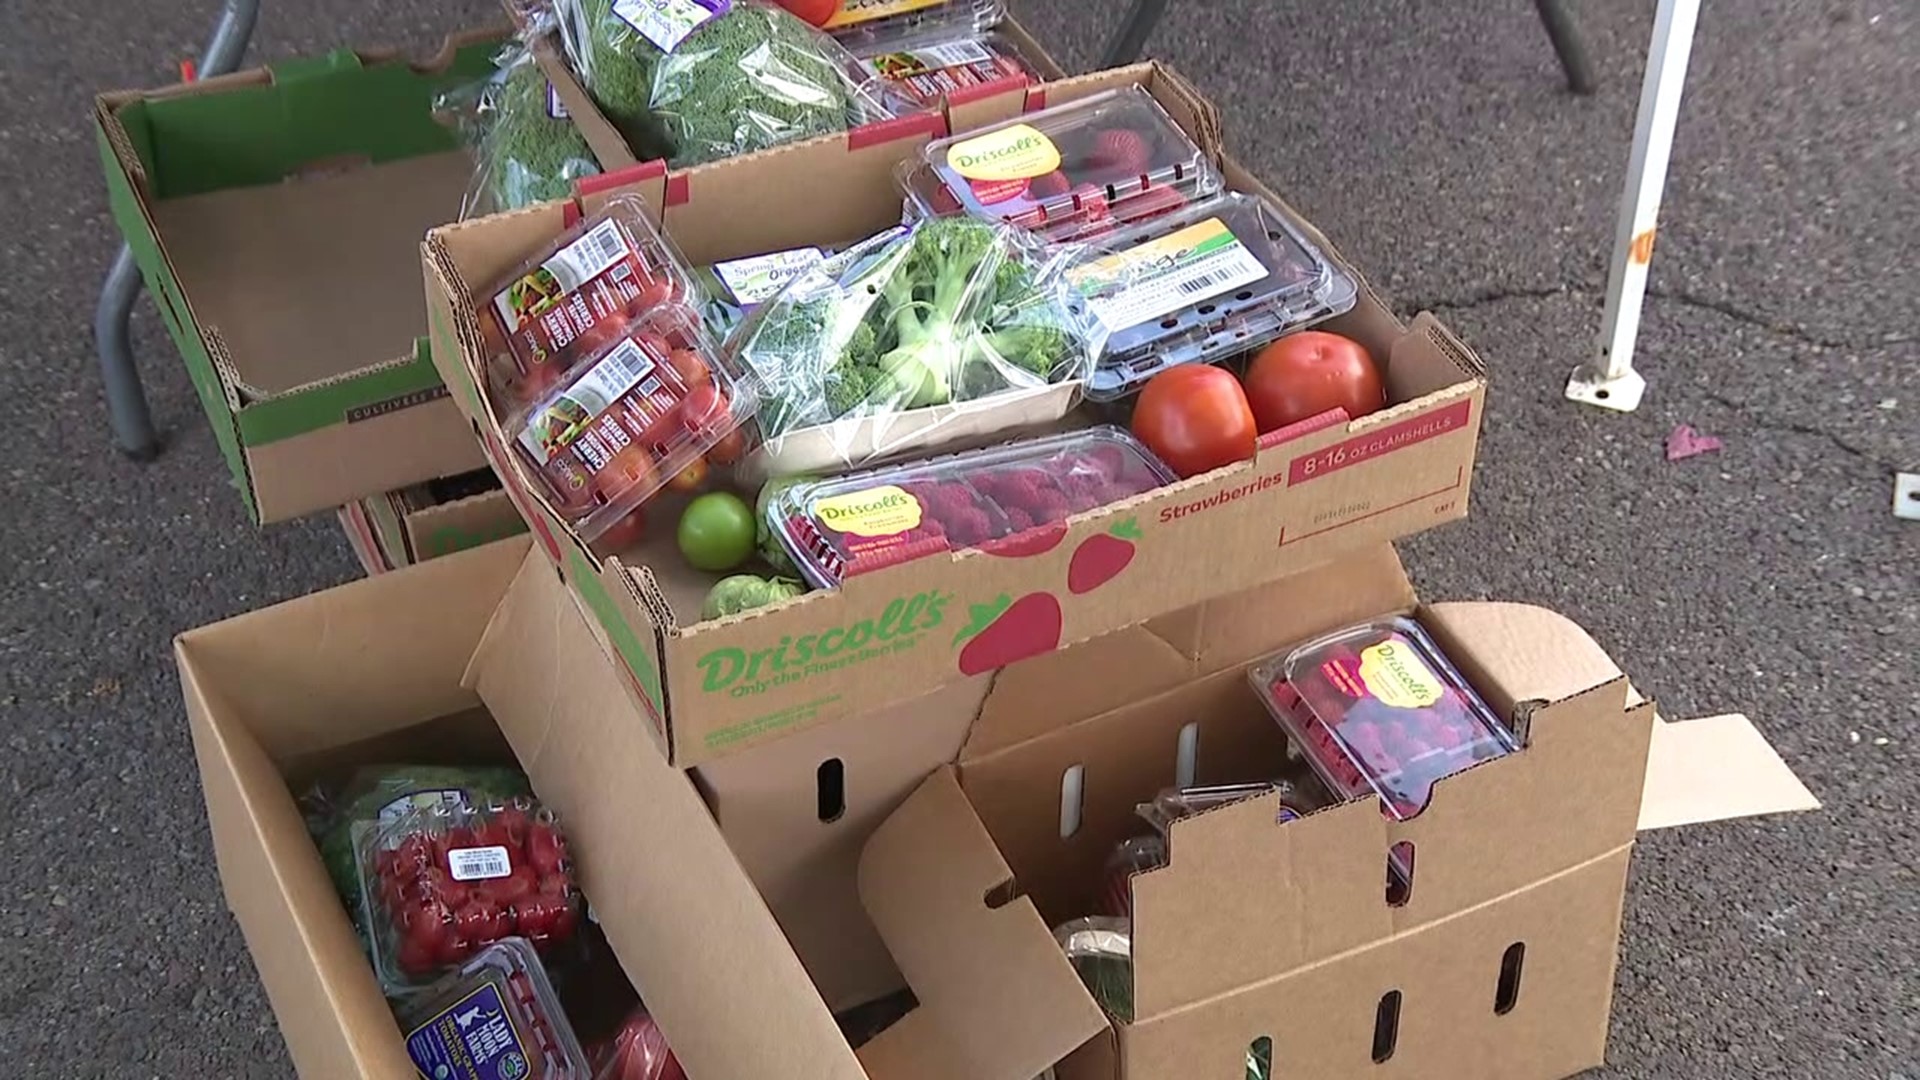 Despite seeing three times the number of people it usually serves, a Berwick food distributor still opens its arms to those in need.